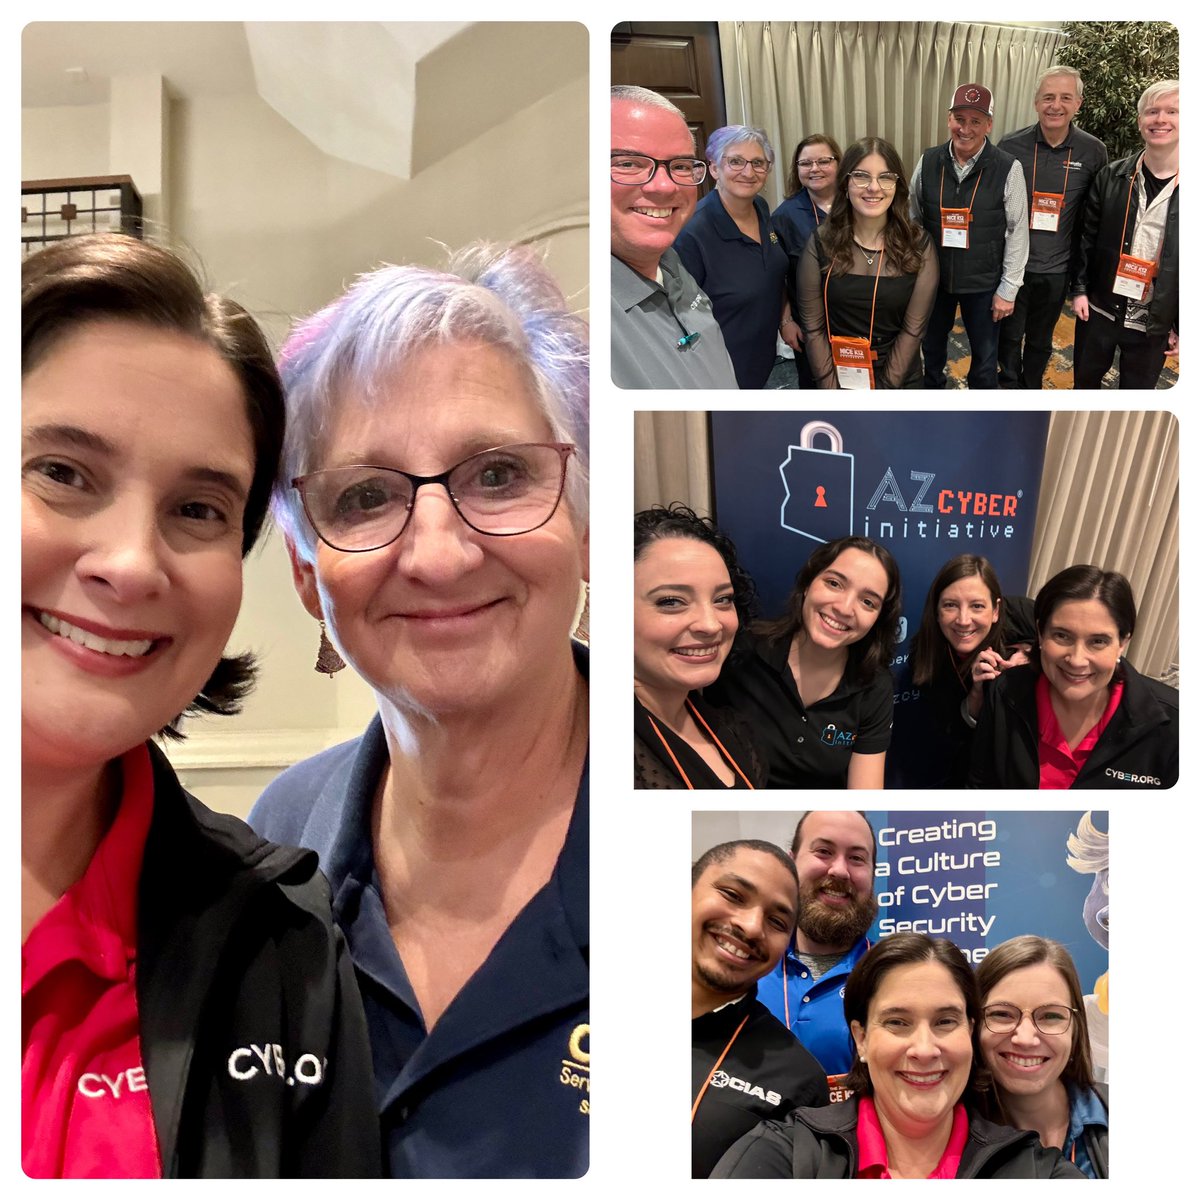 Great connecting with our cyber industry colleagues at this year’s #NICEatNIST #K12Cybersecurity Education Conference. We’re thrilled to continue providing professional development resources to K12 educators, caregivers and more!